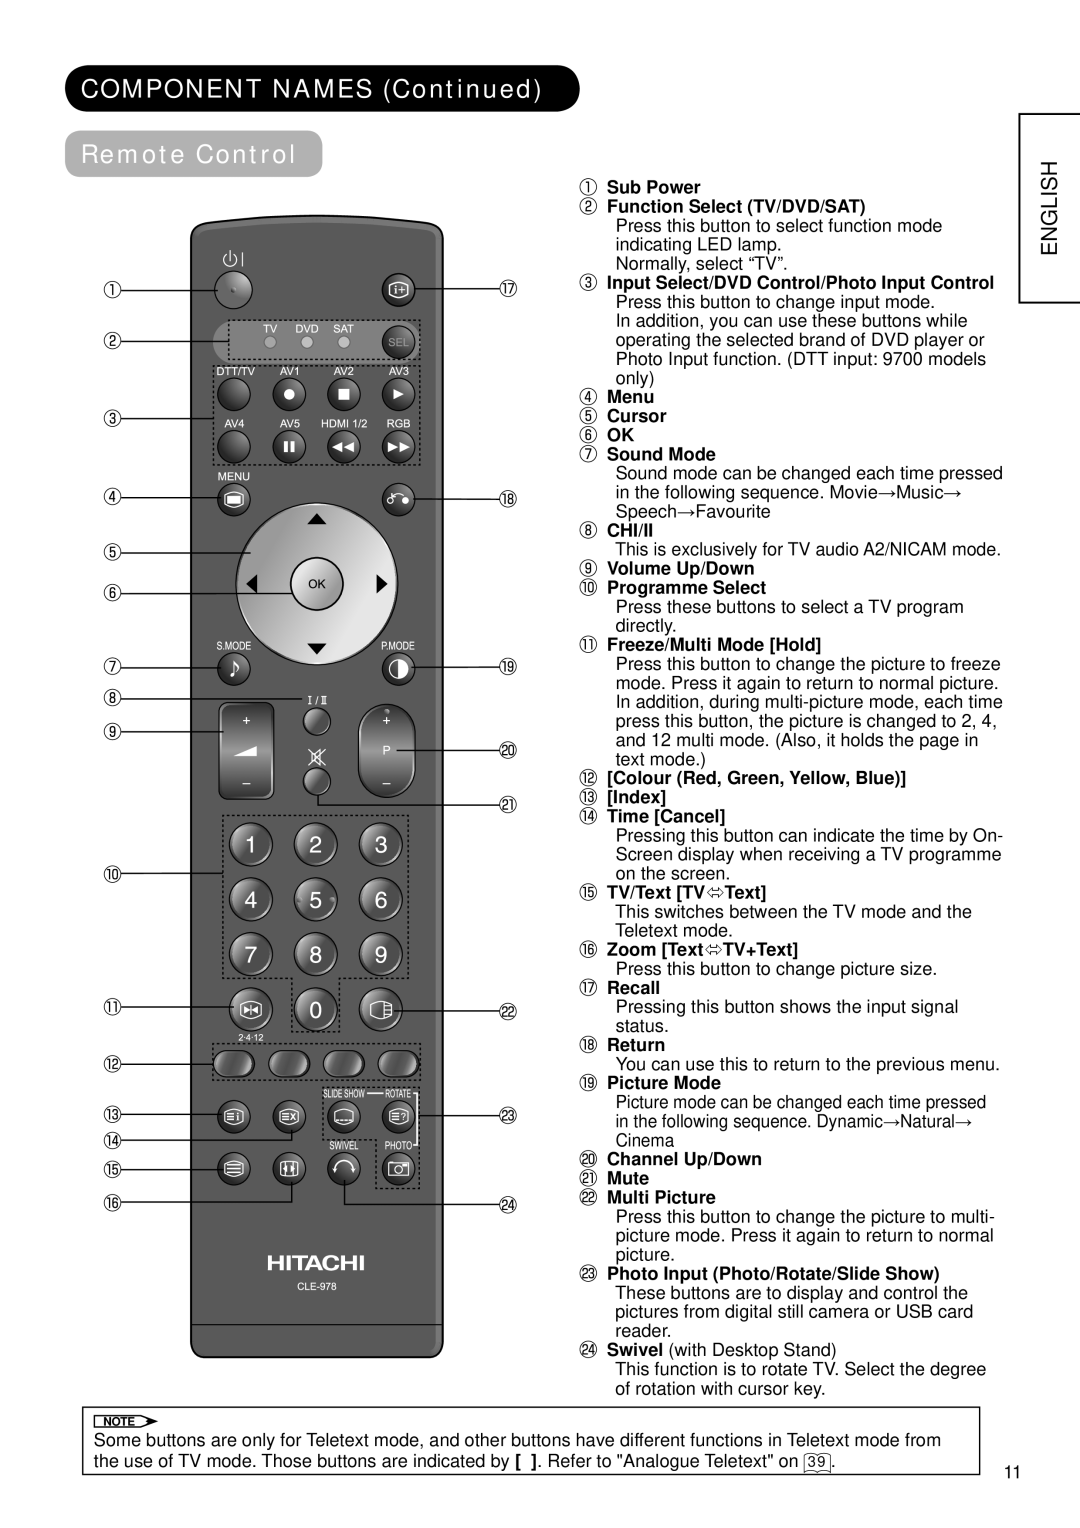 Hitachi 37LD9600 COMPONENT NAMES Continued Remote Control, English, Sub Power Function Select TV/DVD/SAT, Chi/Ii, Recall 